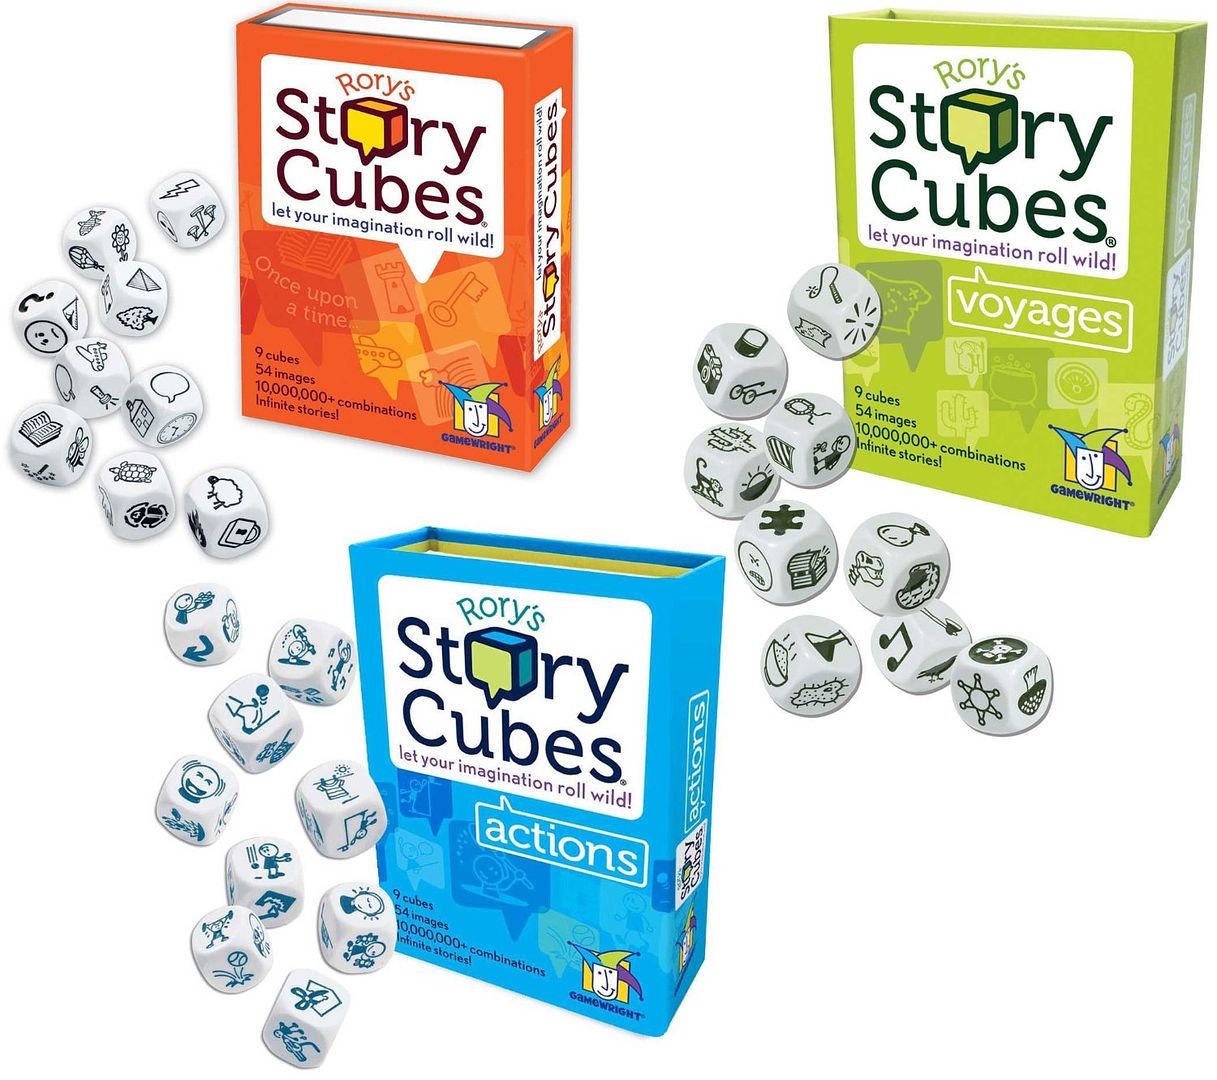 Best car games for kids: Rory's Story Cubes help get the creative juices flowing for all ages